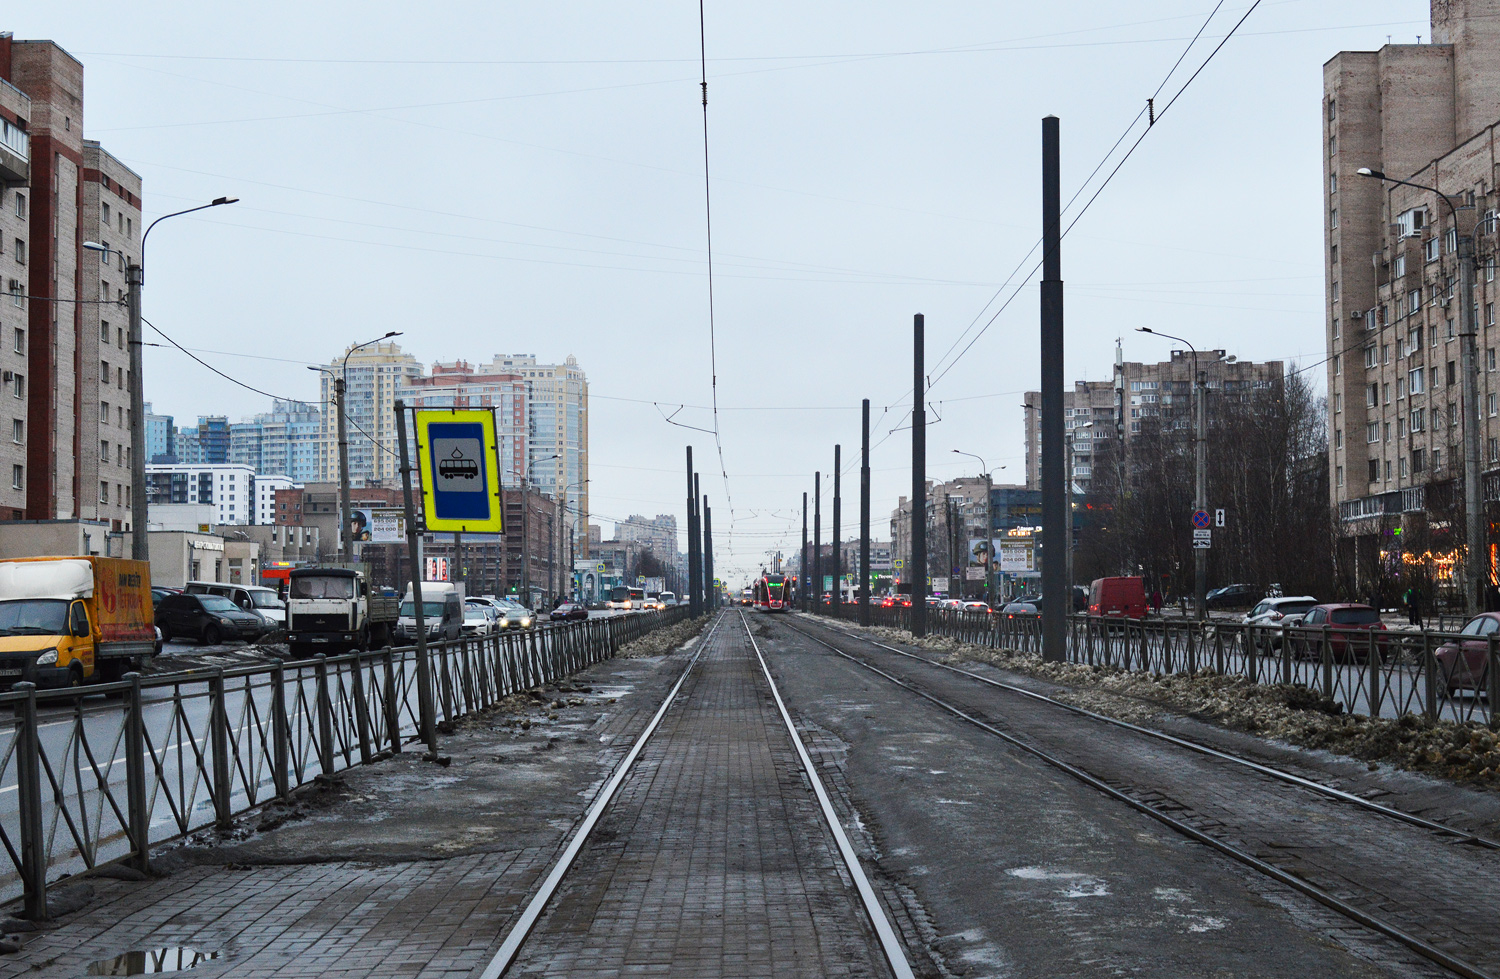 Petrohrad — Tram lines and infrastructure